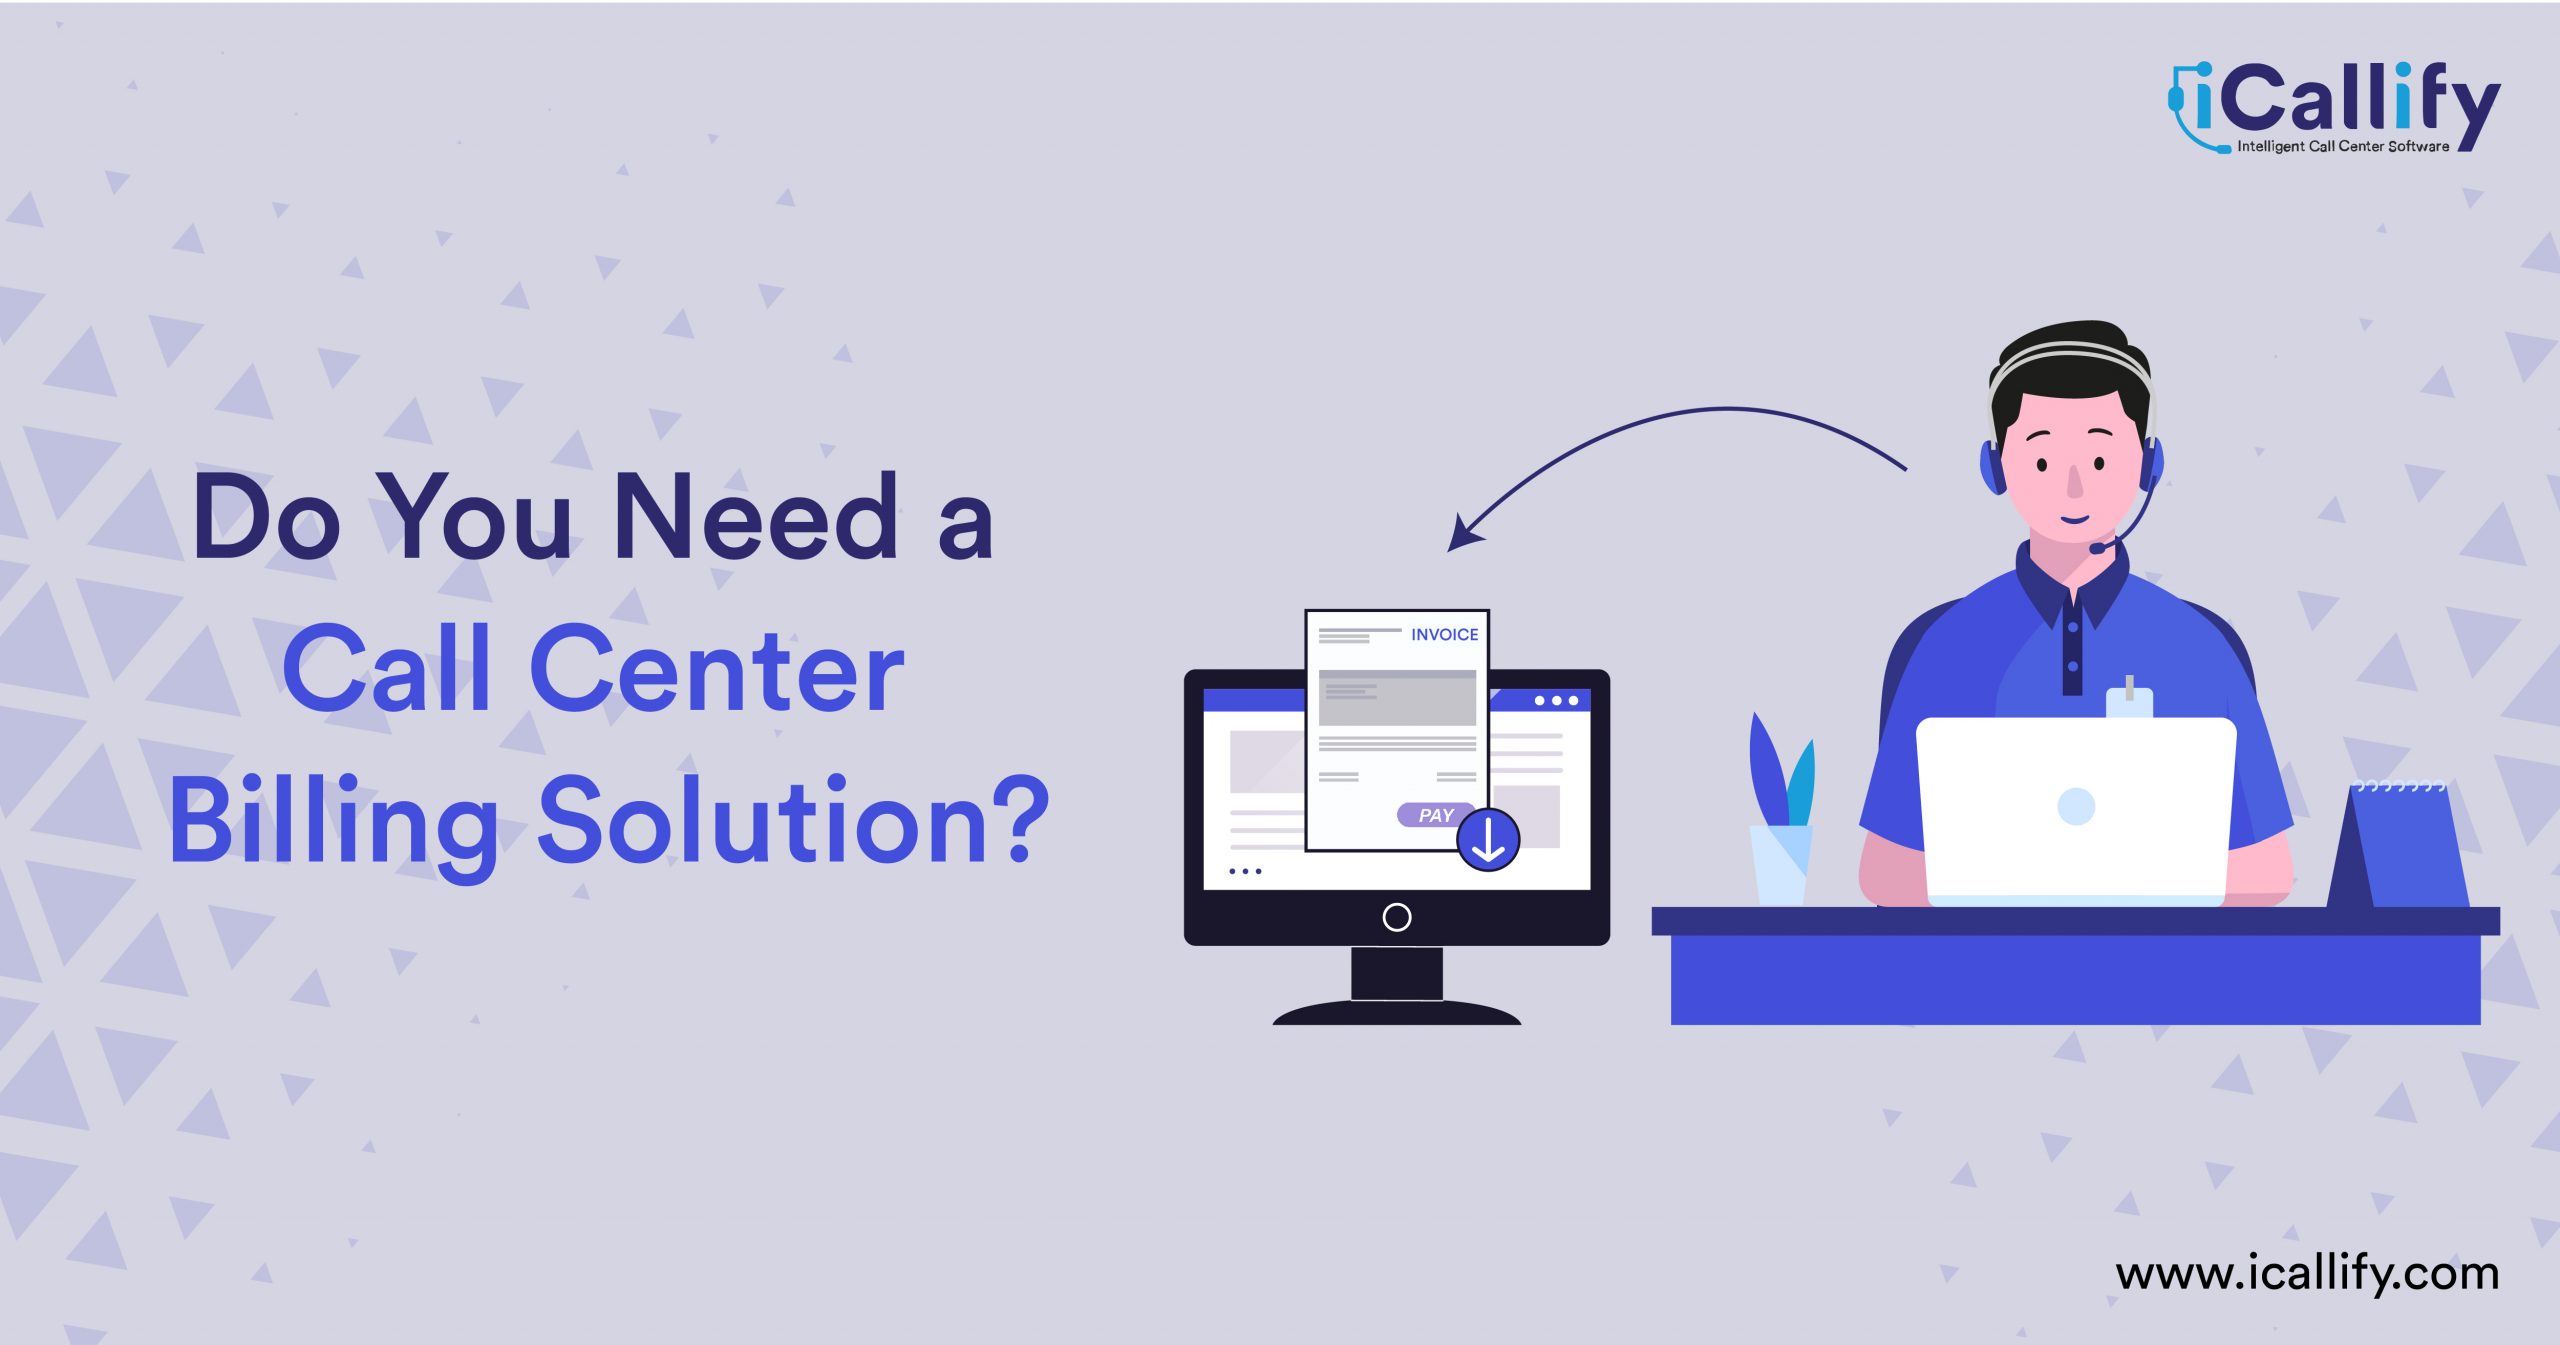 Do You Need a Call Center Billing Solution?